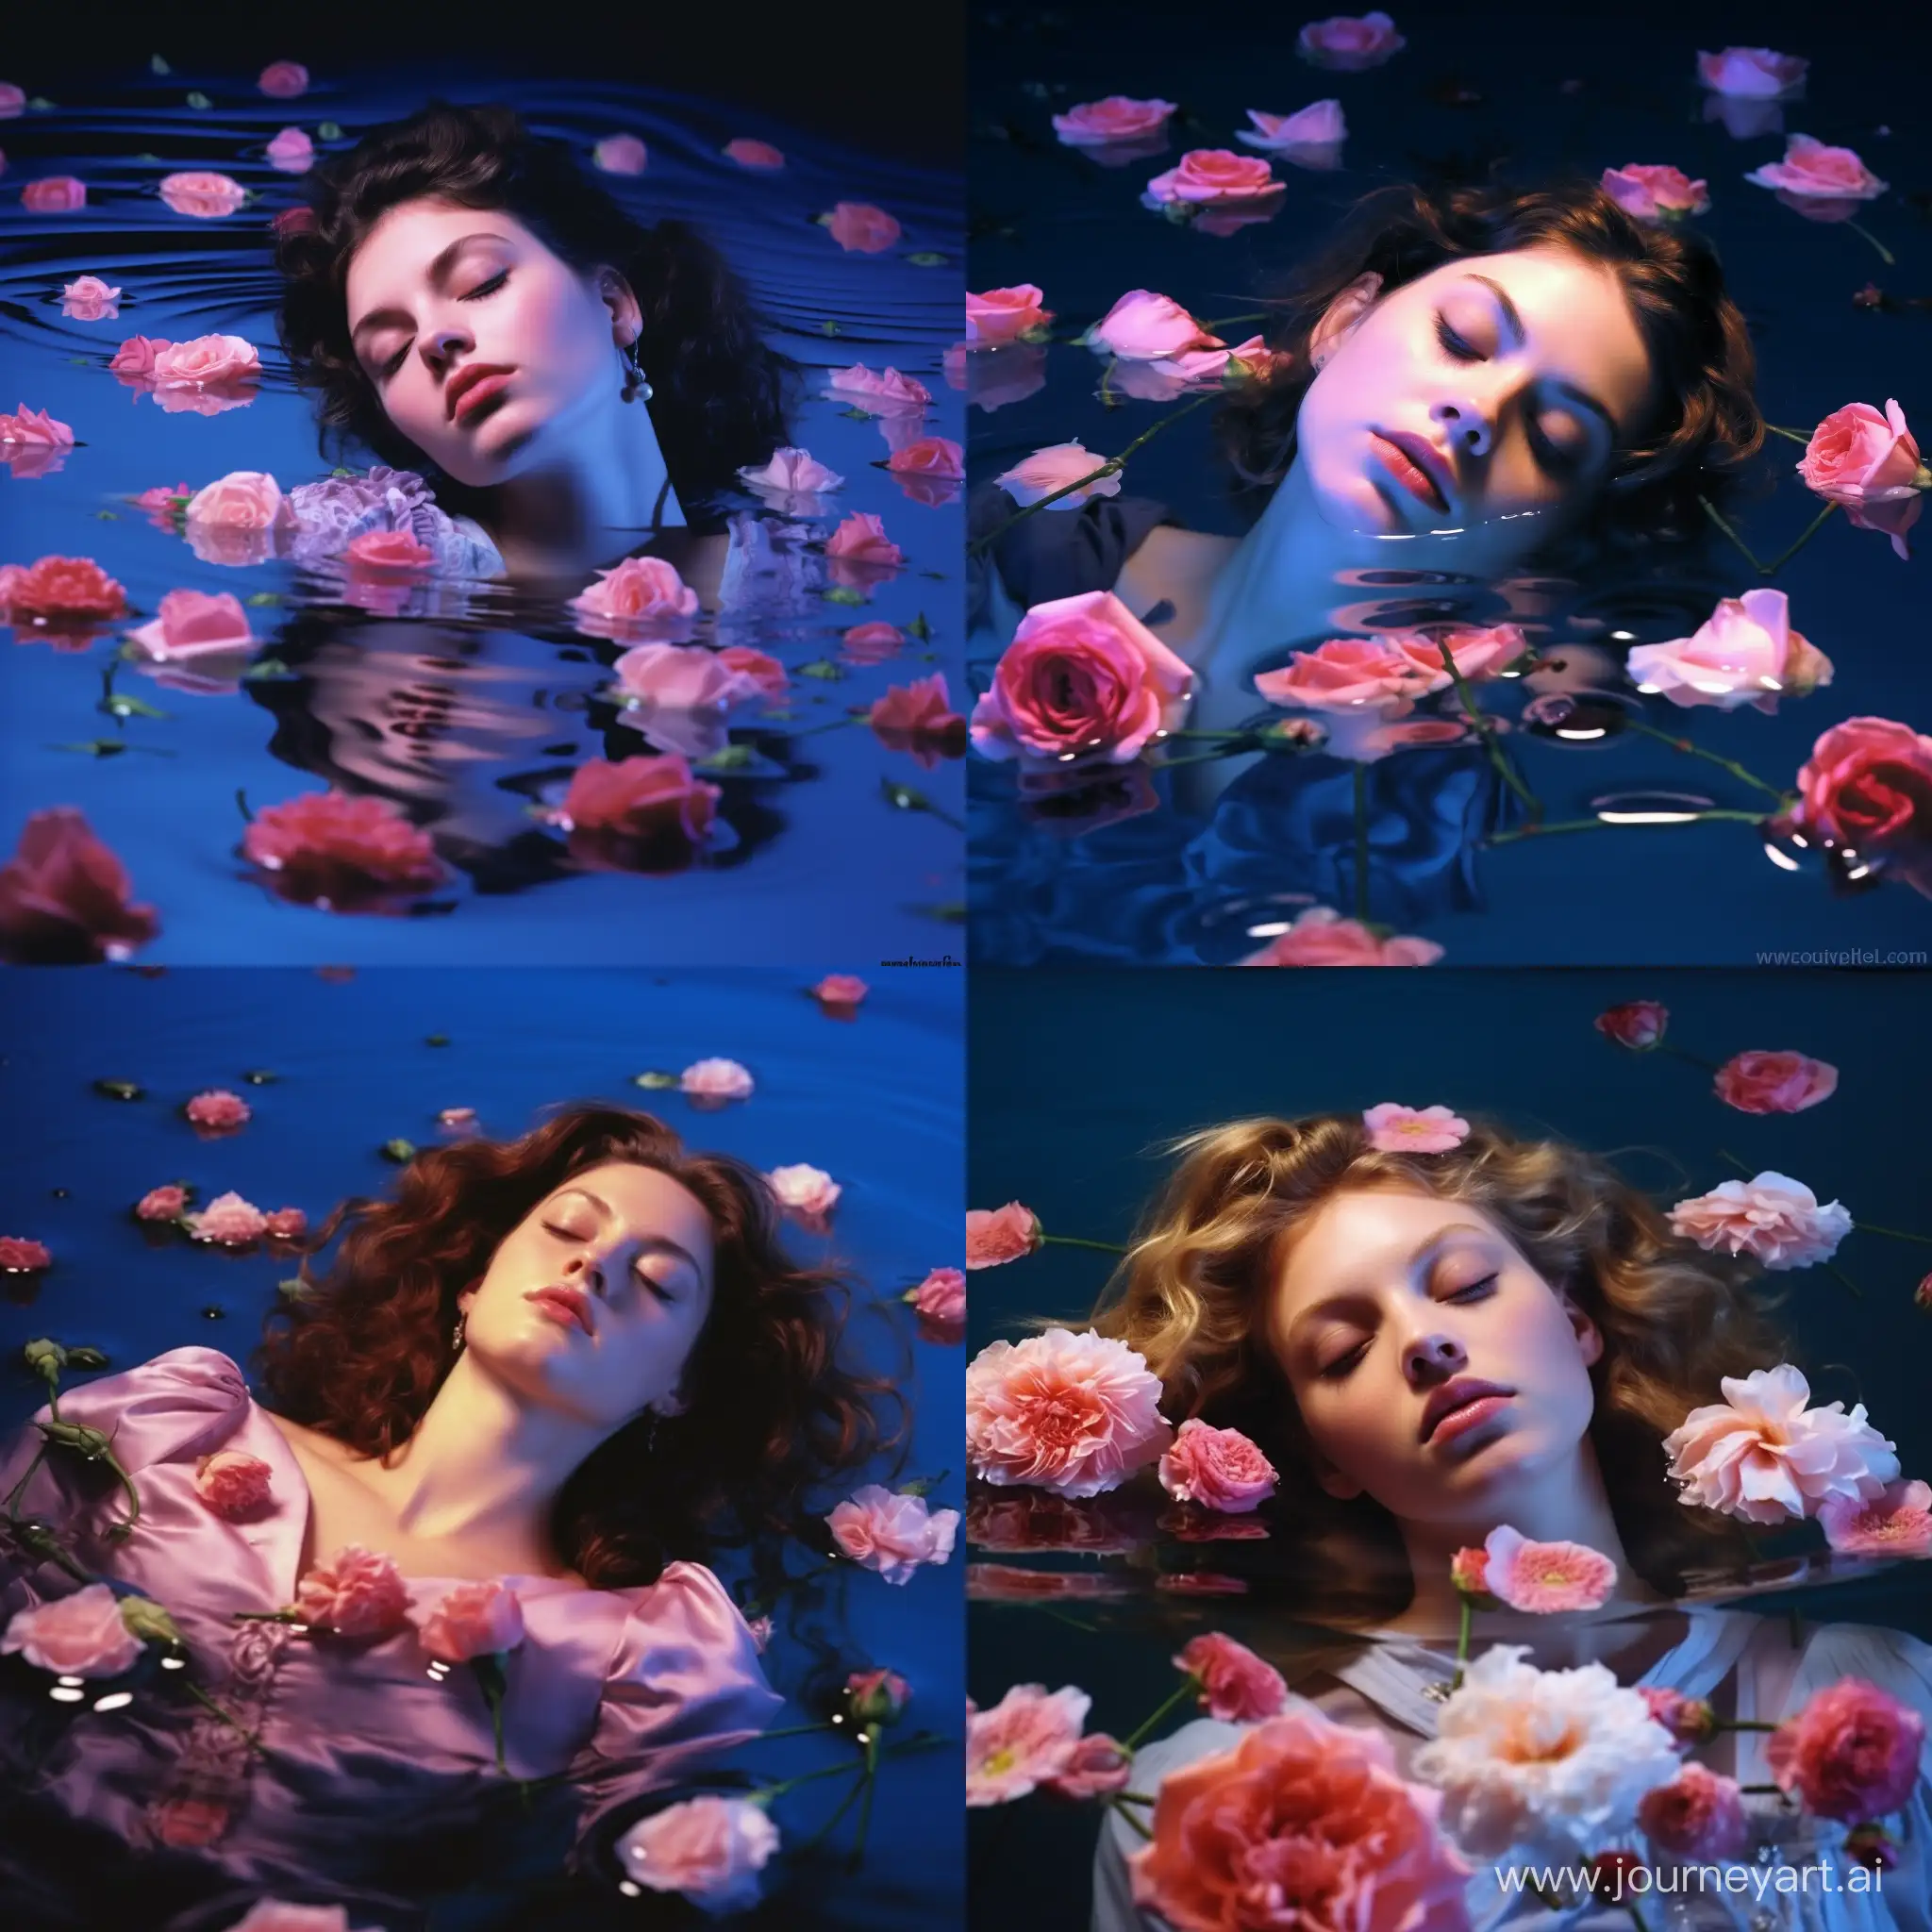 A very realistic 21 years old girl, floating on the water in a light pink dress, relax. the photo is a promotional shoot. flowers are floating on the water around her. it's night time and blue underwater lights are on. the photography is in Miles Aldridge's style.